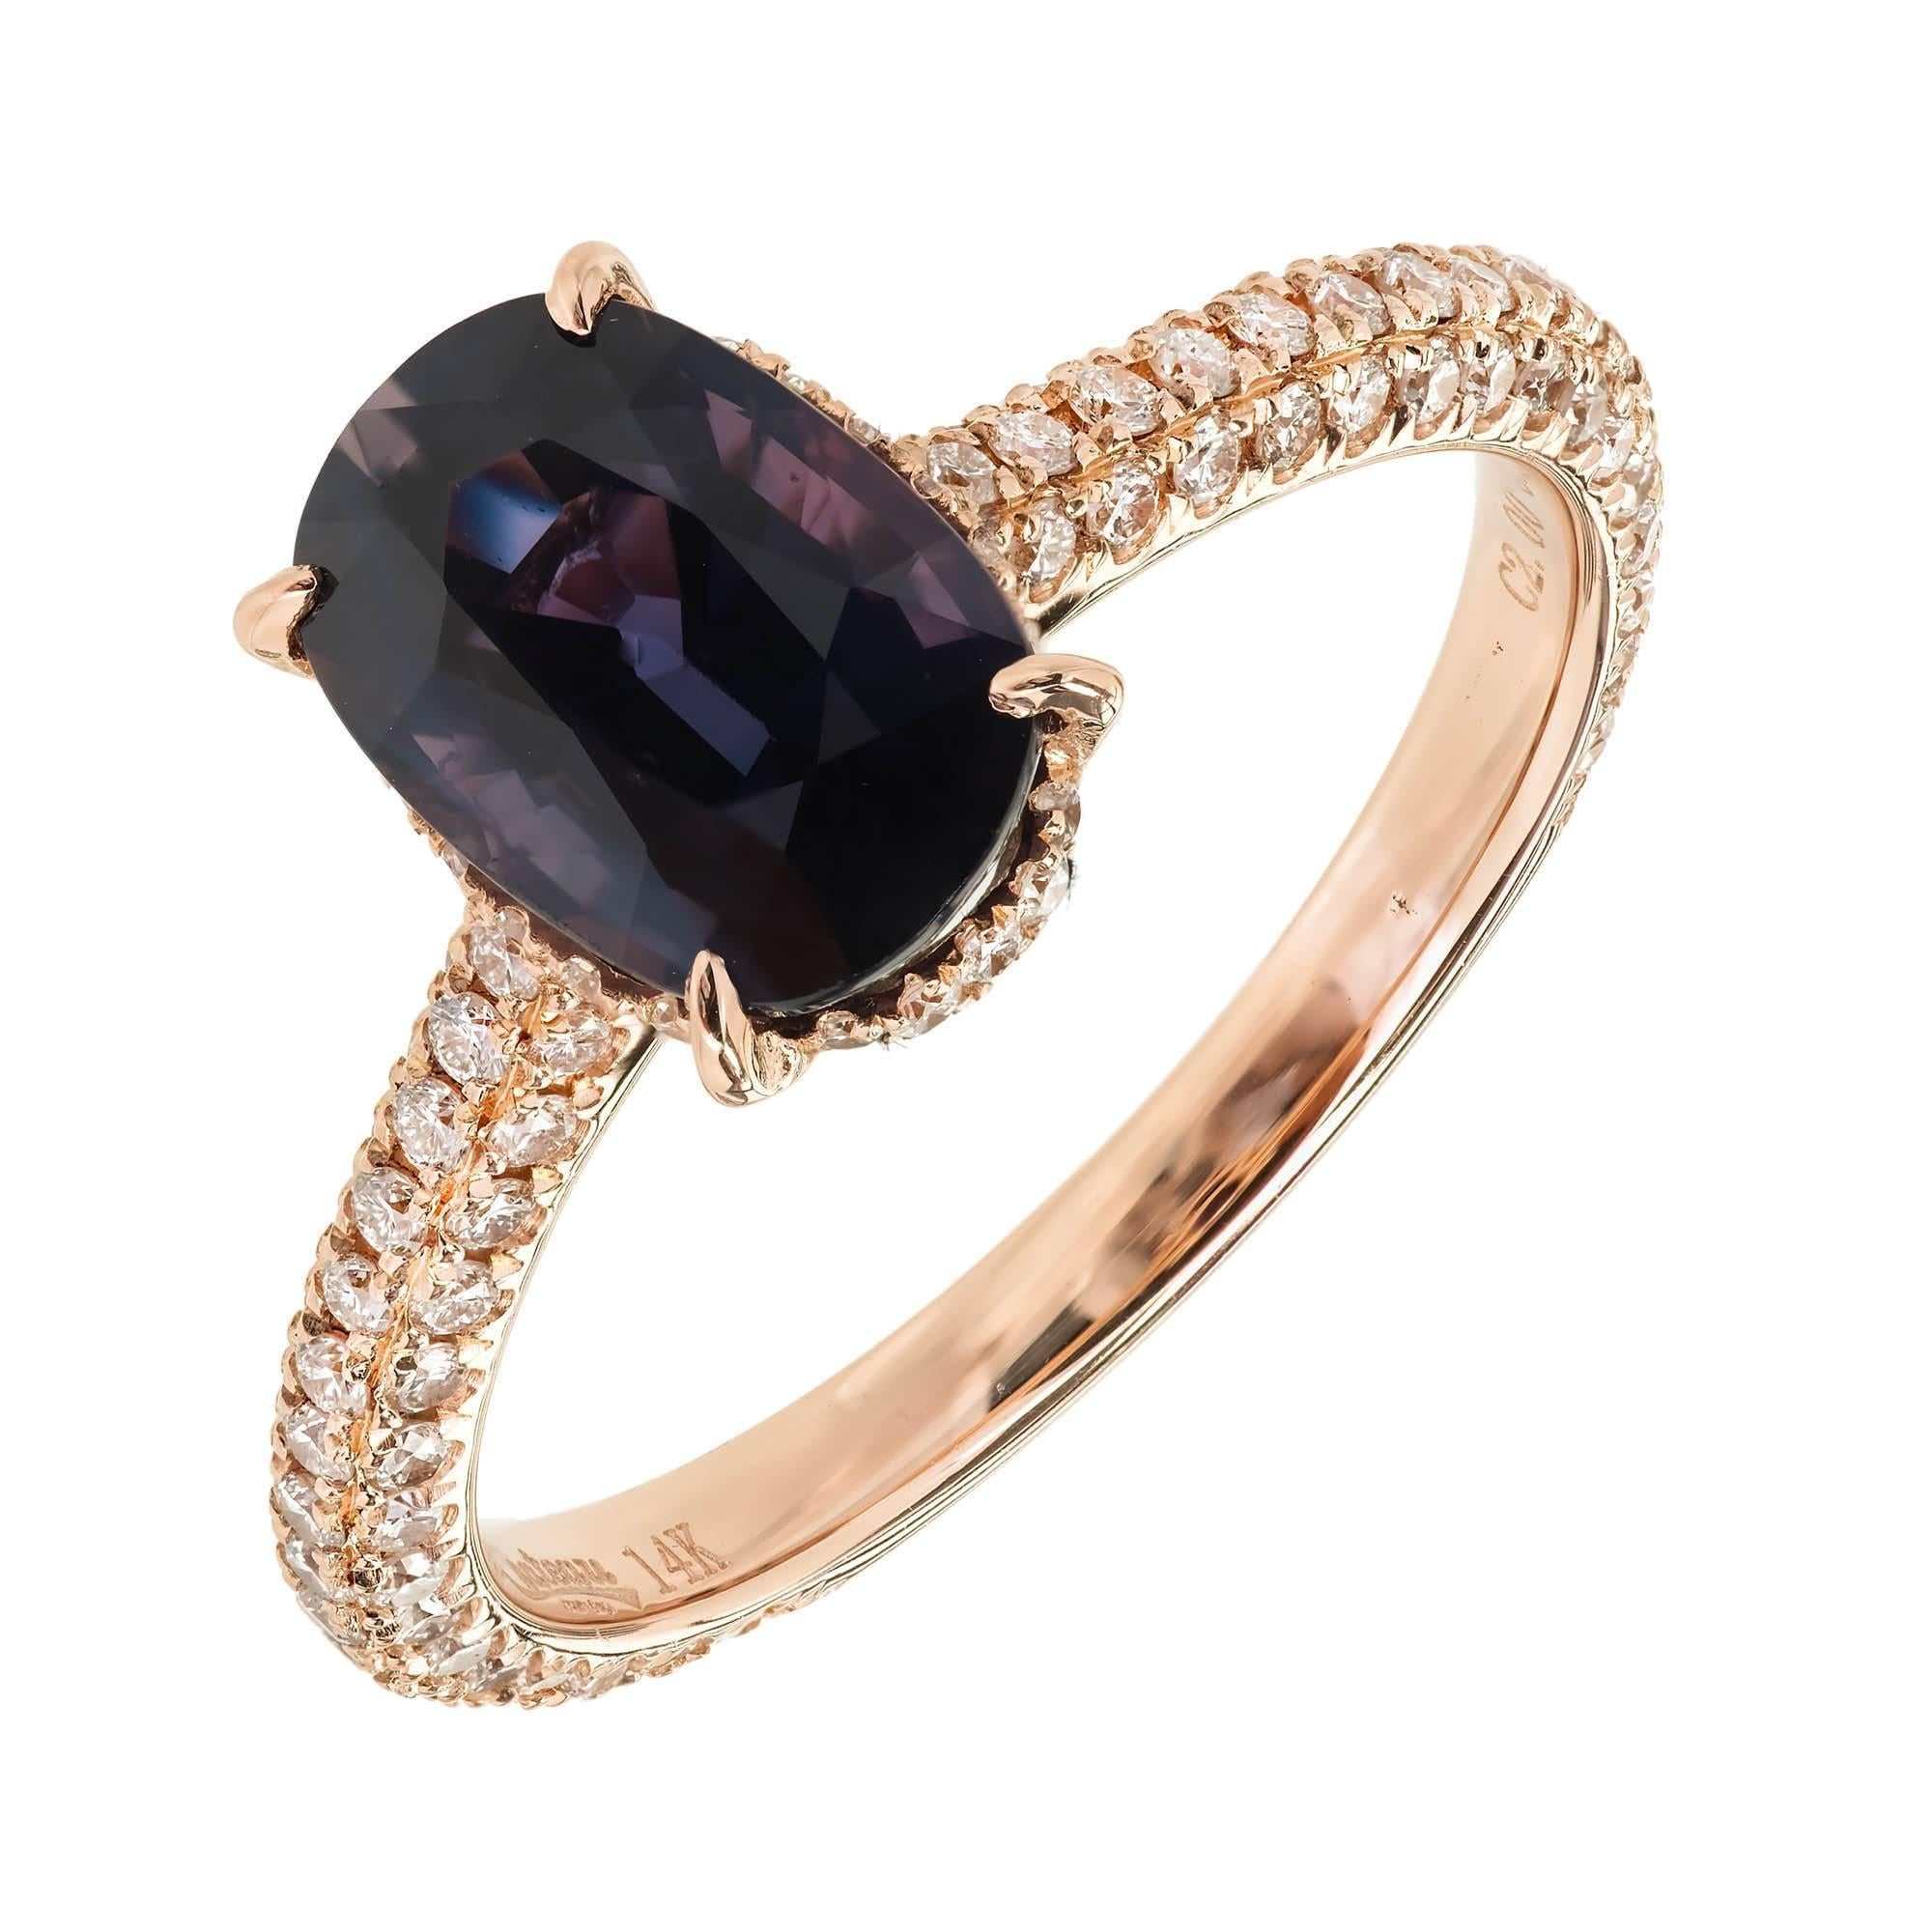 Certified natural color change cushion cut Sapphire diamond engagement ring in a 14k rose gold setting by designer Chateau. micro pavé  Ideal full cut Diamonds  Changes color from blue in daylight to purple in incandescent light.

1 cushion dark